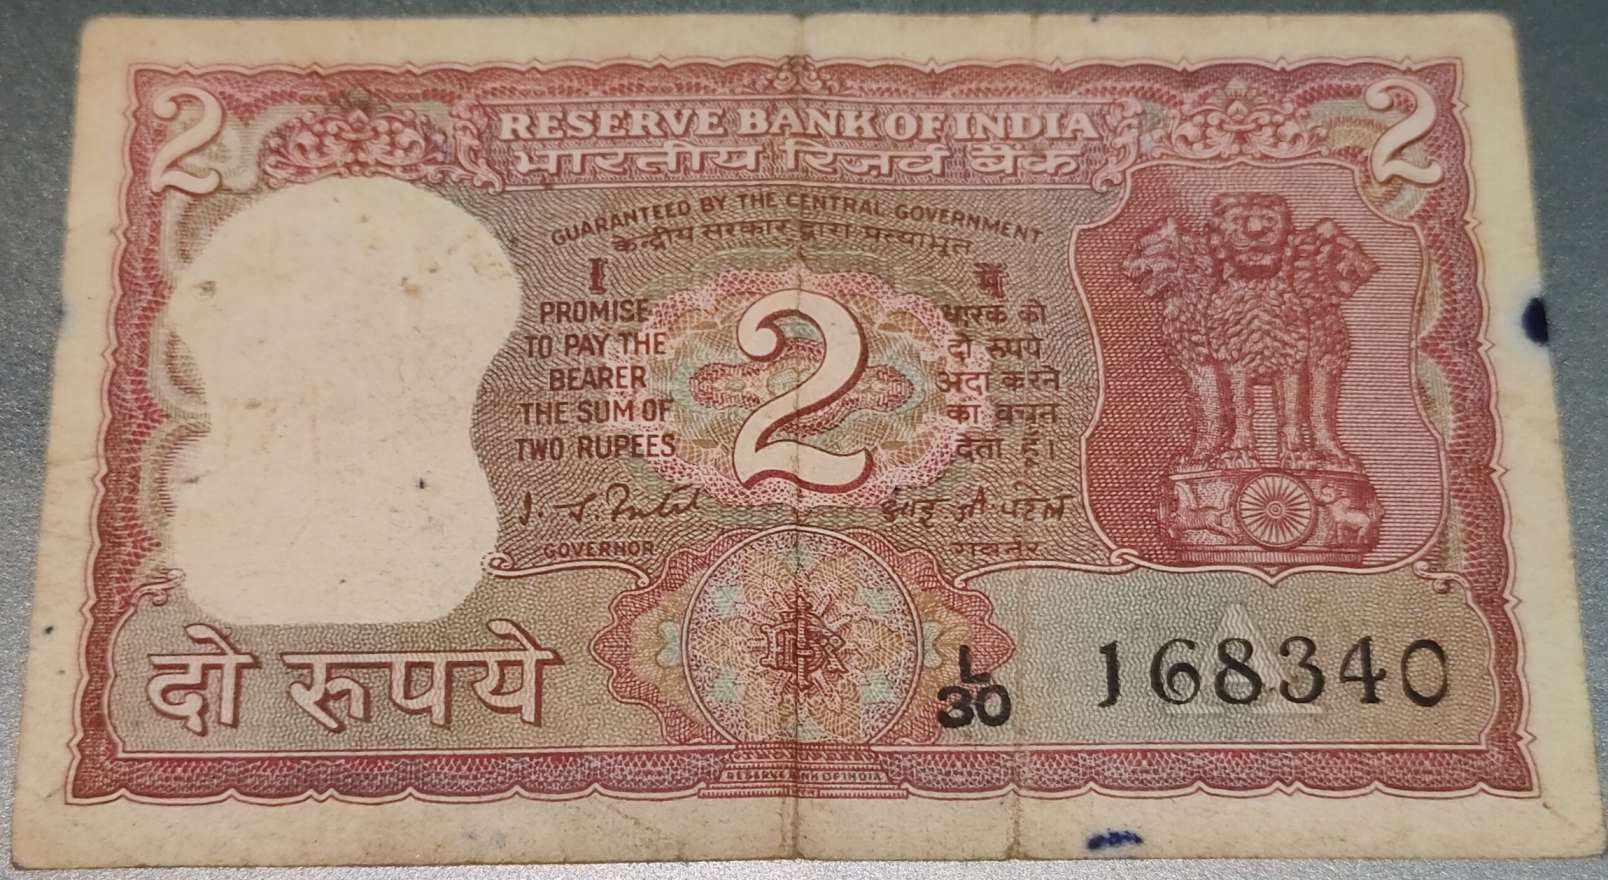 2 rupees note